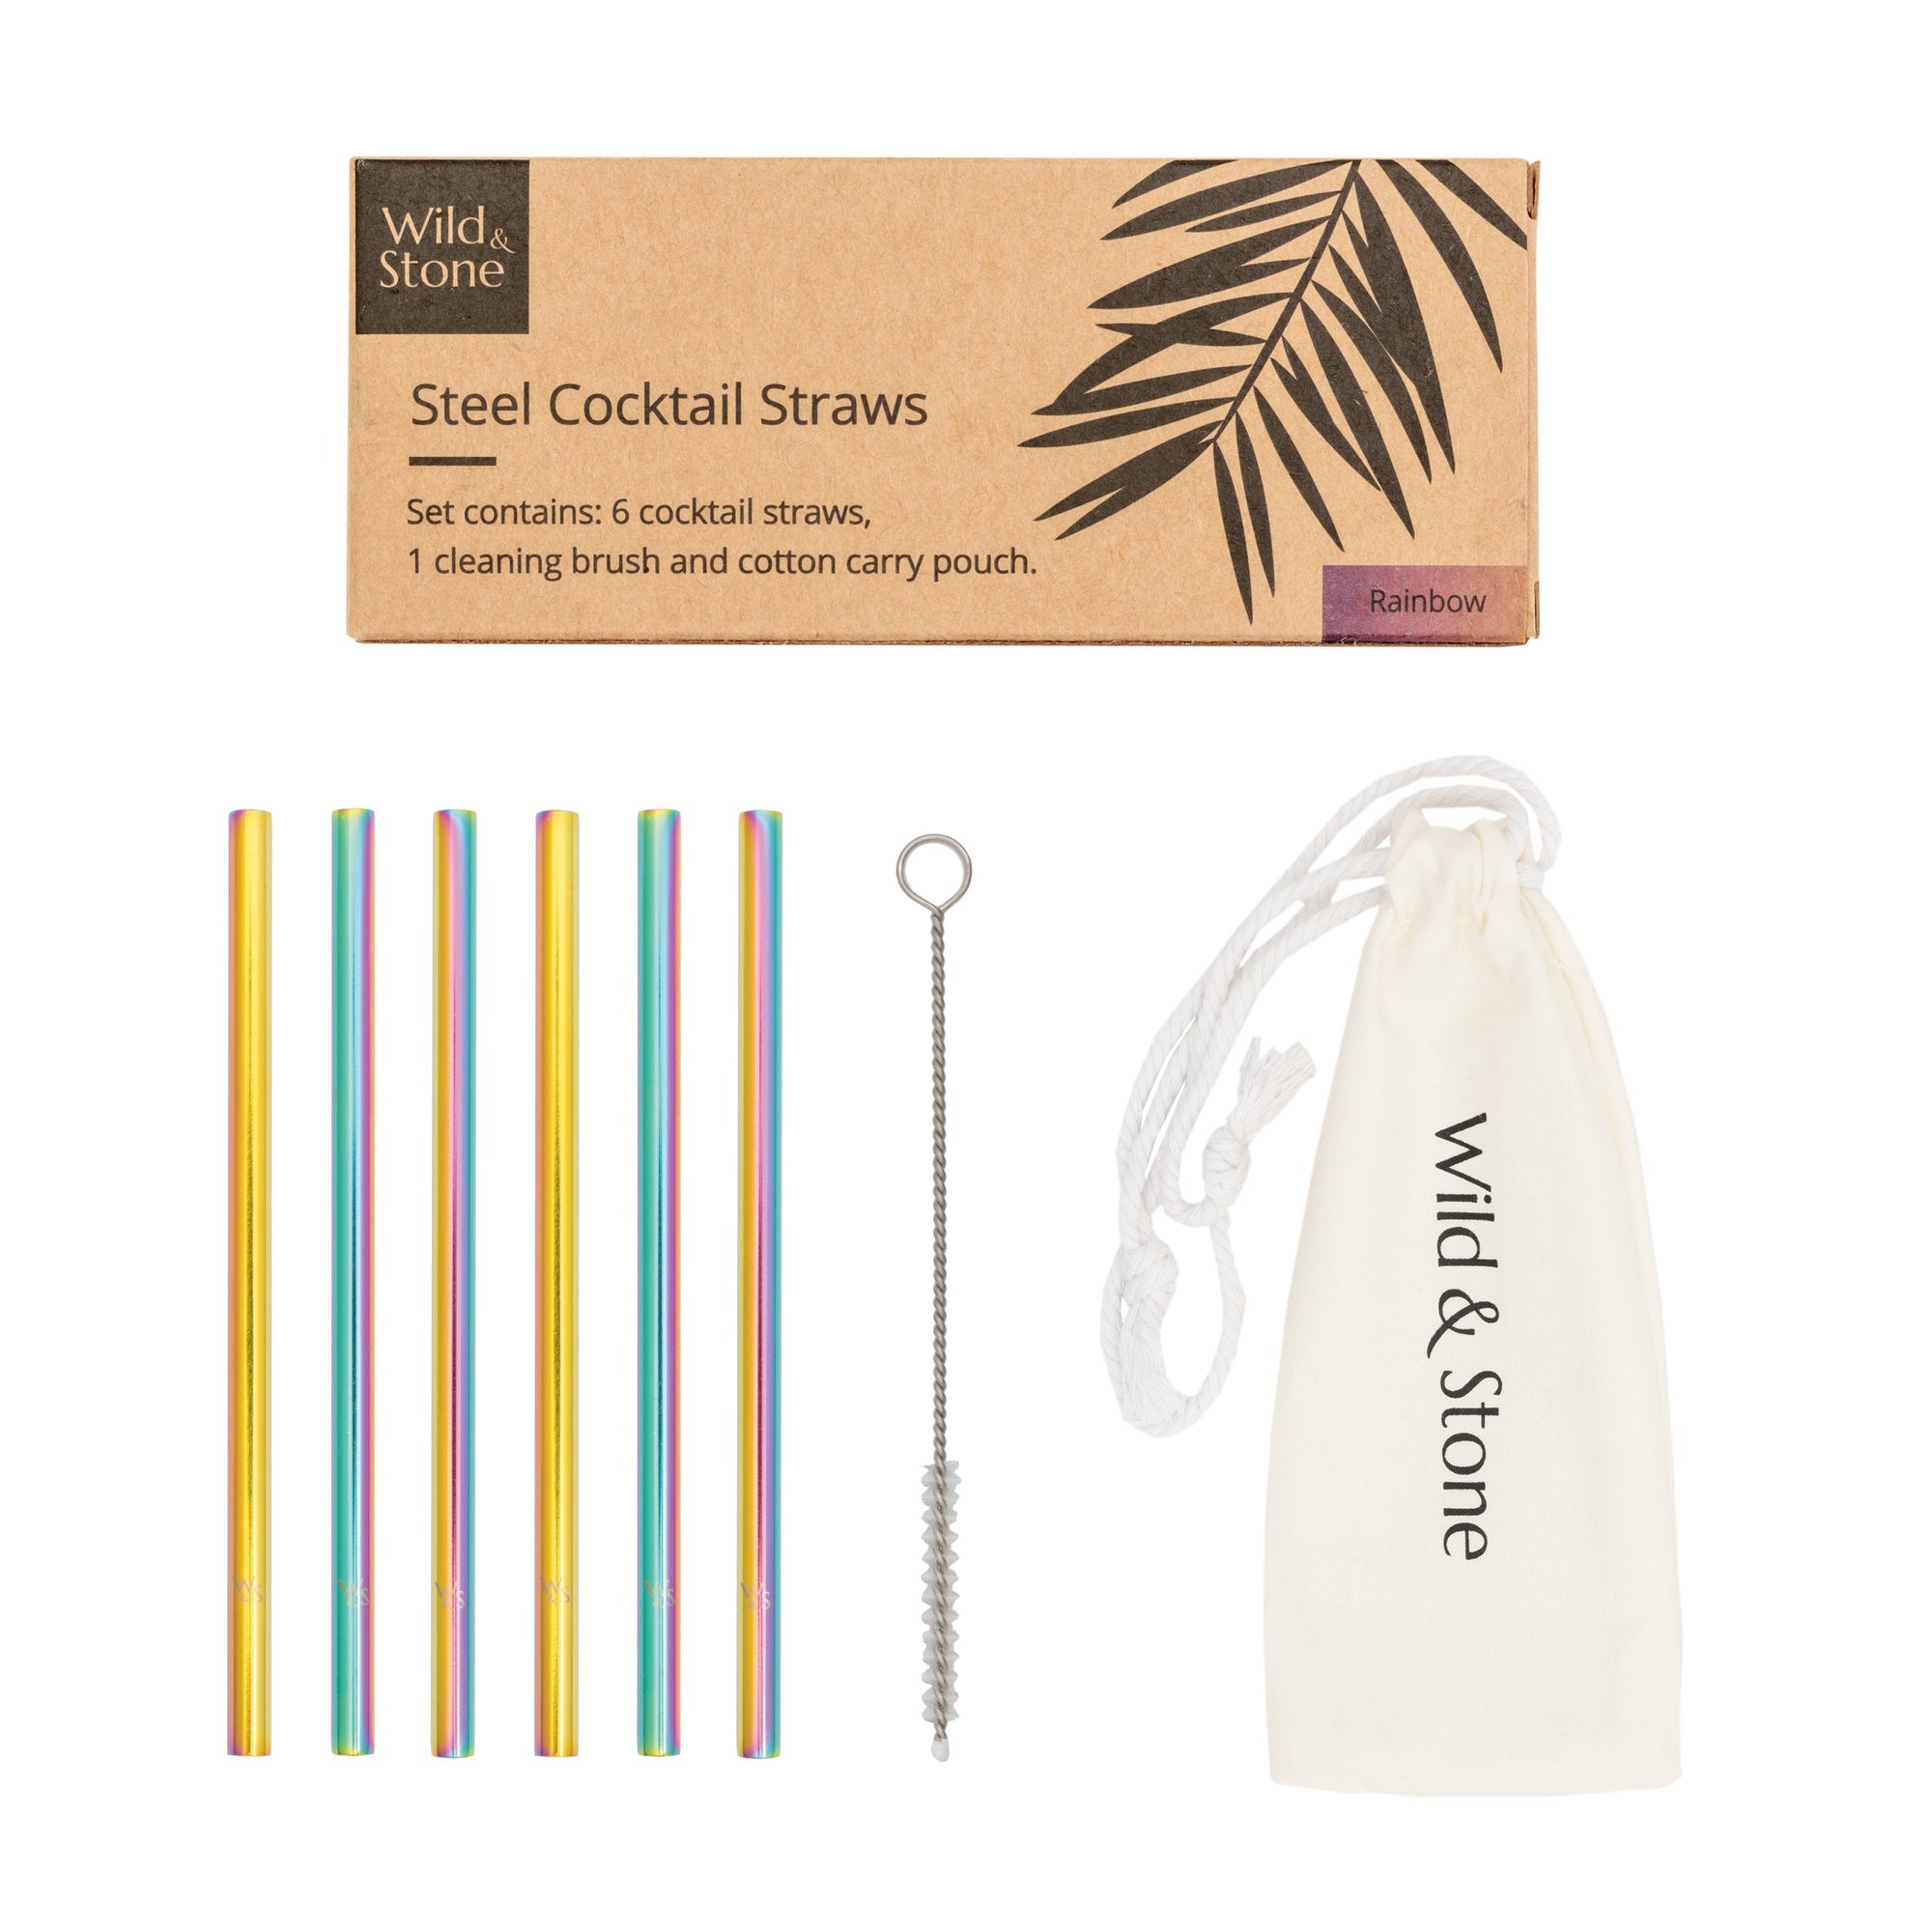 Tall Metal Straw Pack - Crazy Uncle Mikes